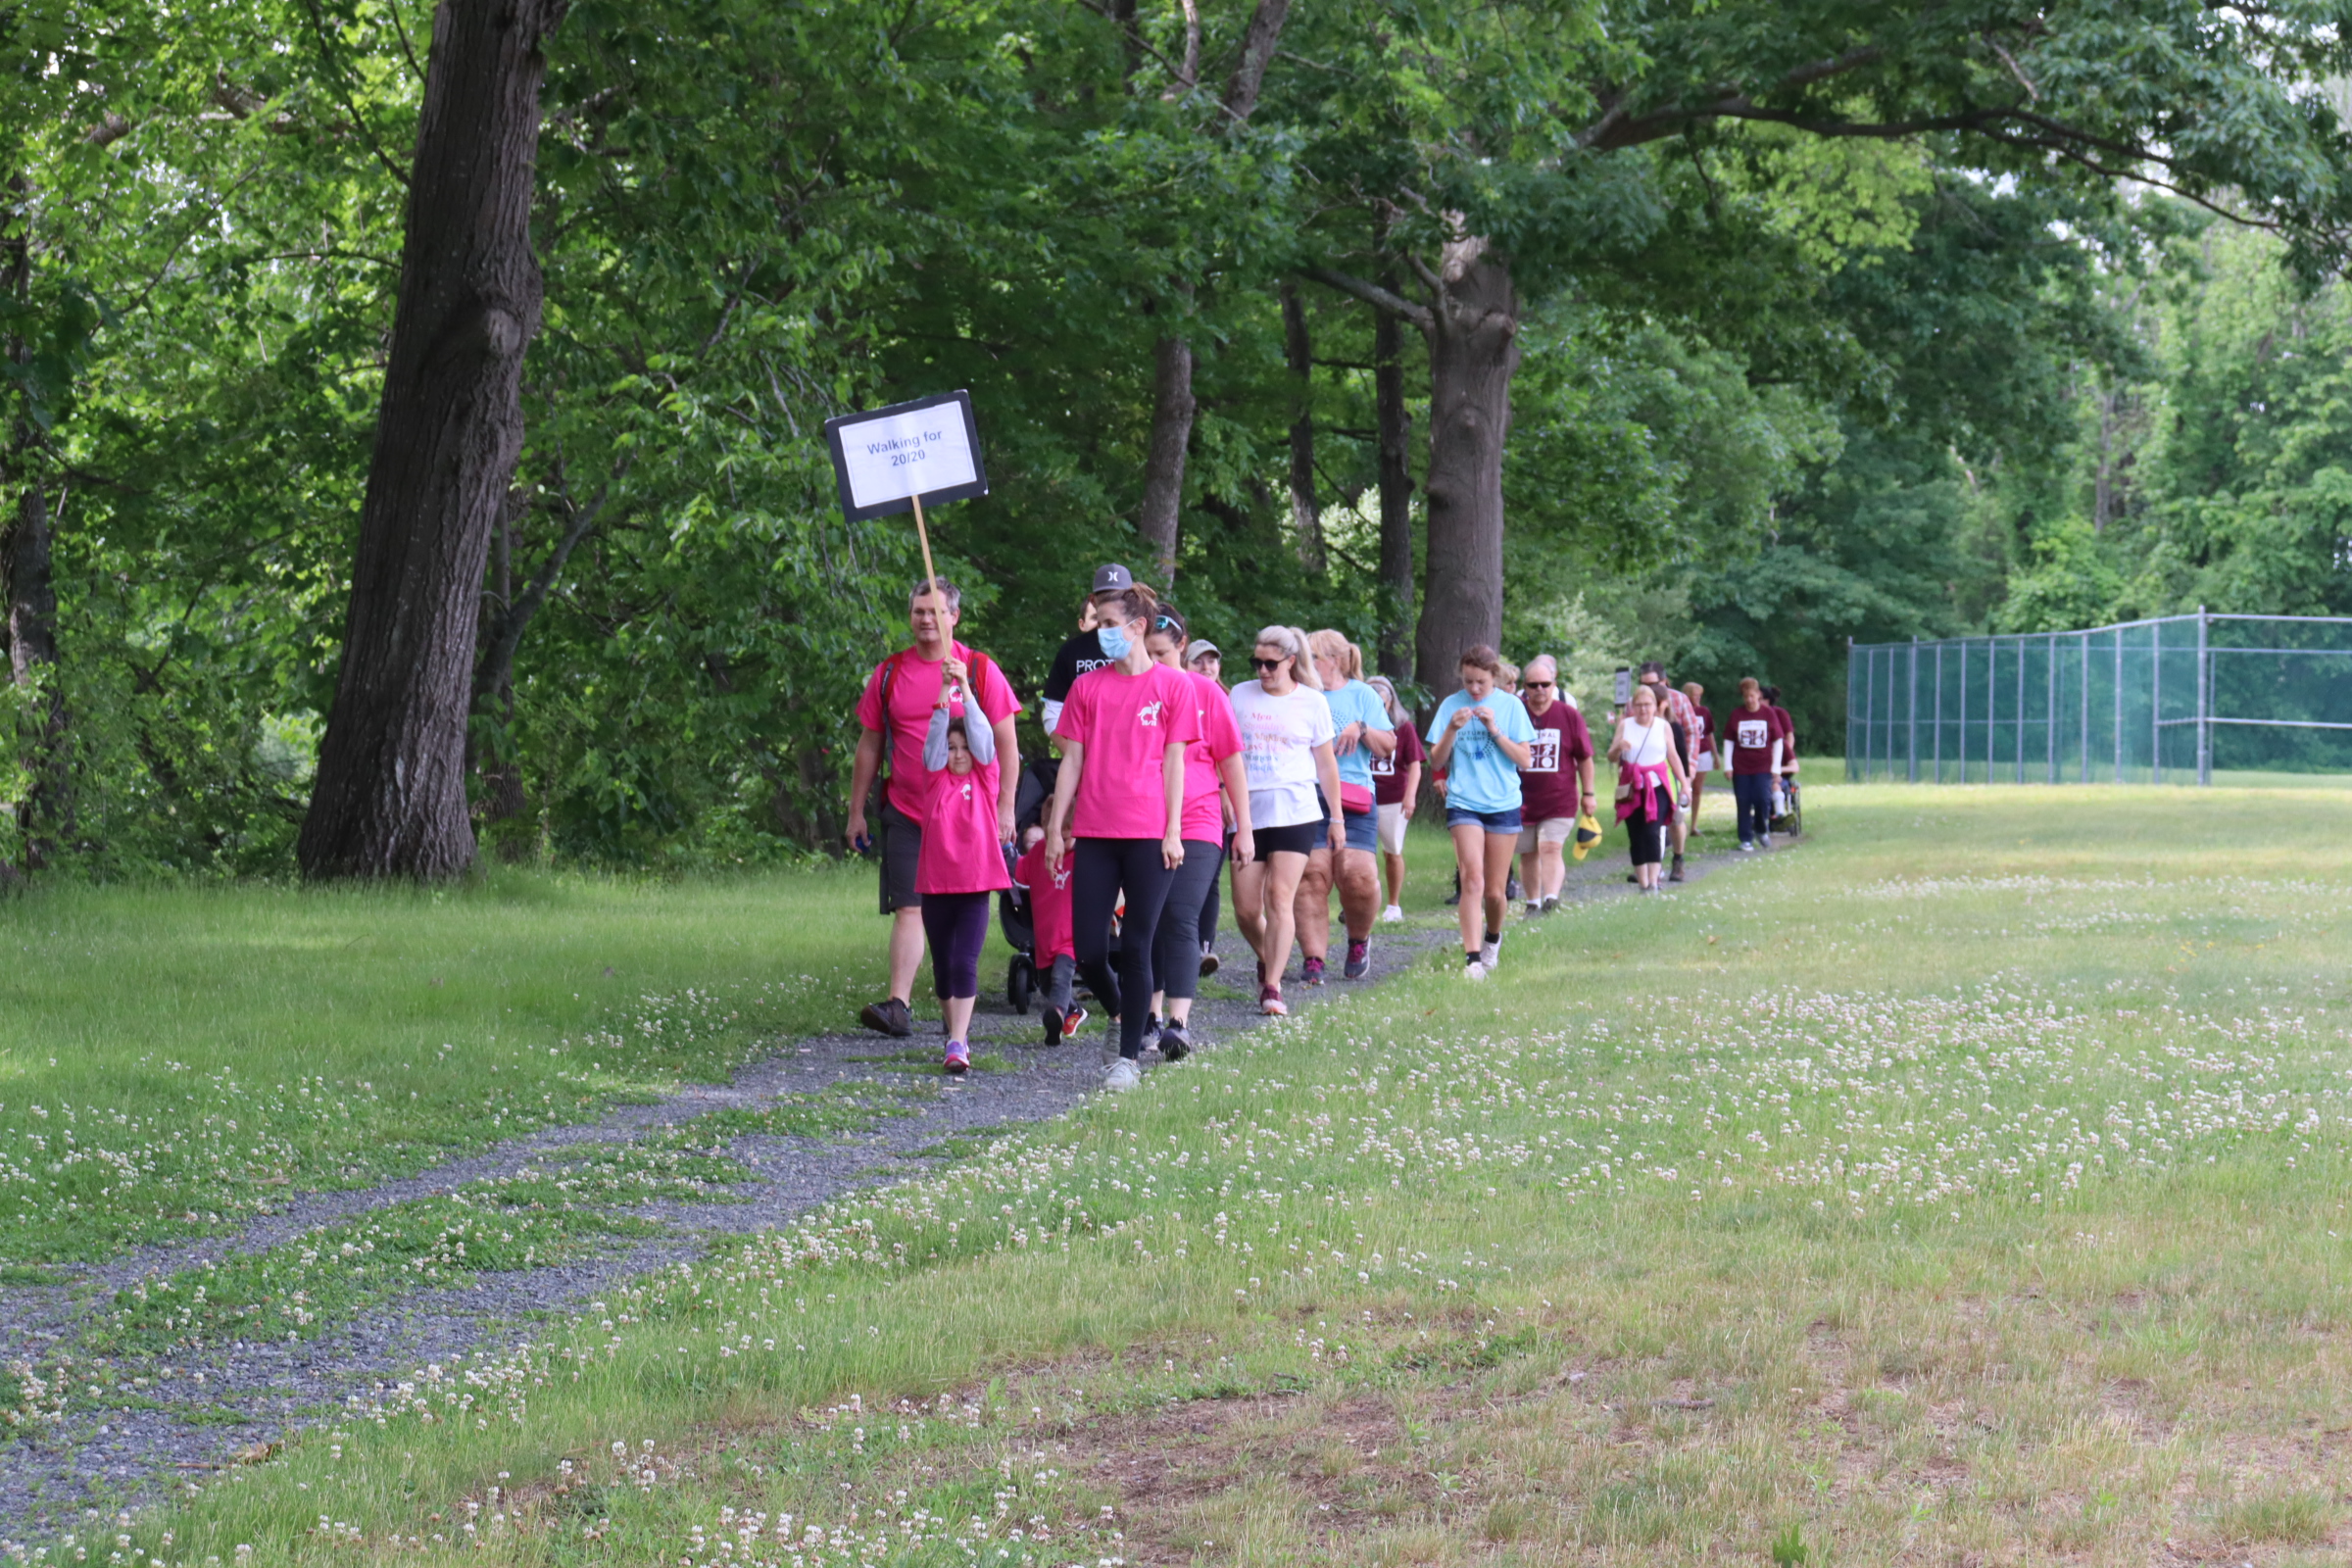 a group of walkers duing the Walk for Sight